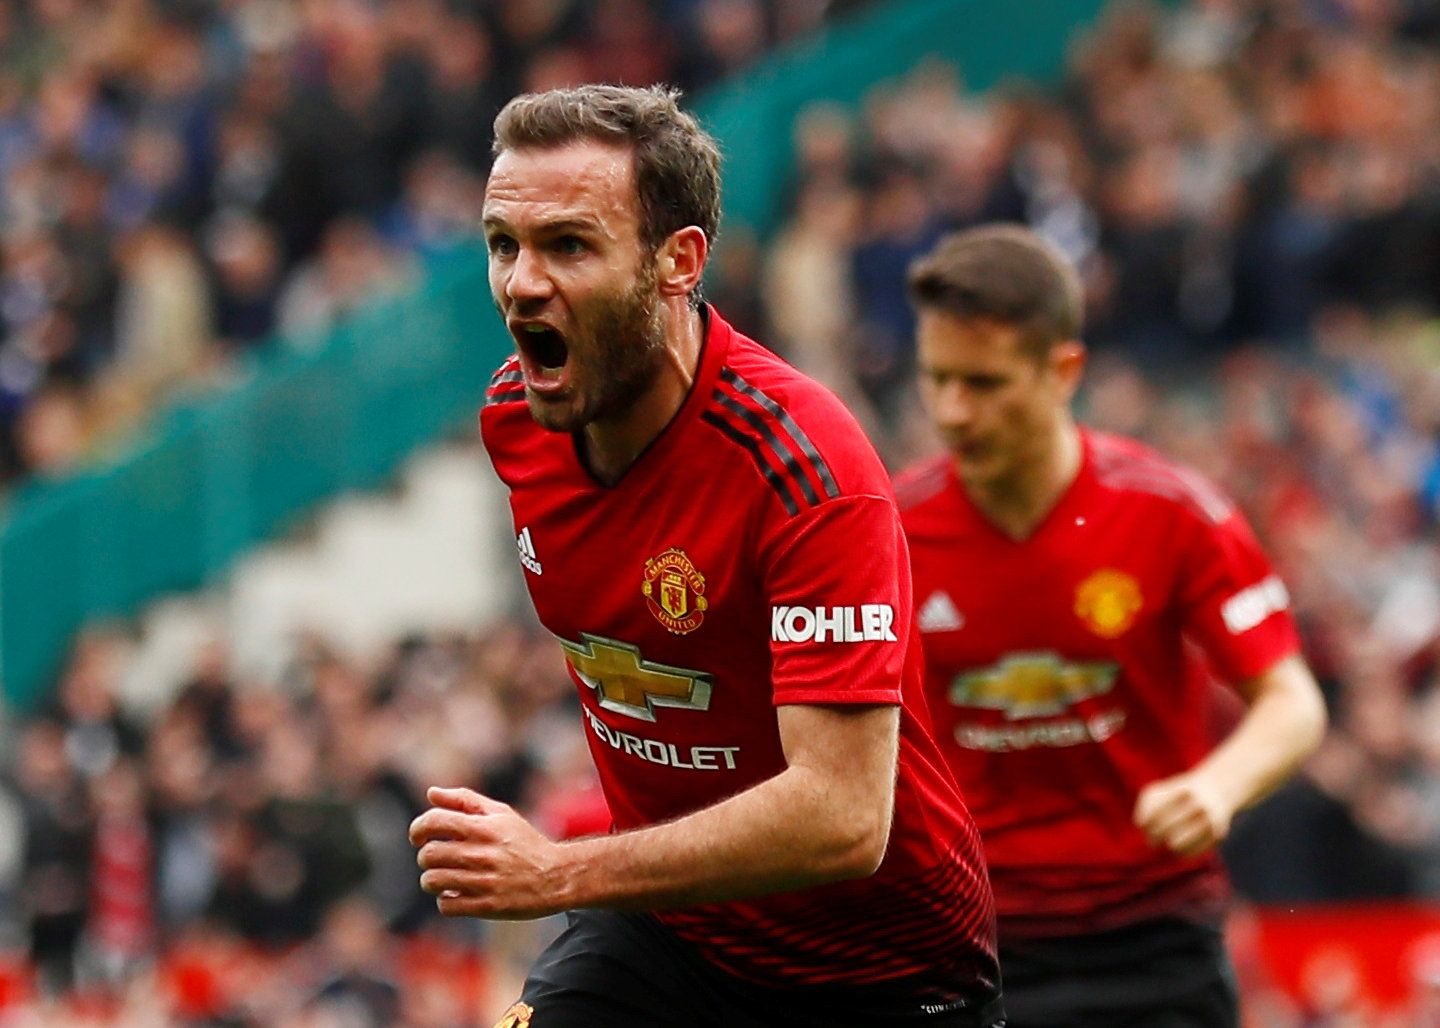 Soccer Football - Premier League - Manchester United v Chelsea - Old Trafford, Manchester, Britain - April 28, 2019  Manchester United's Juan Mata celebrates scoring their first goal   Action Images via Reuters/Jason Cairnduff  EDITORIAL USE ONLY. No use with unauthorized audio, video, data, fixture lists, club/league logos or 